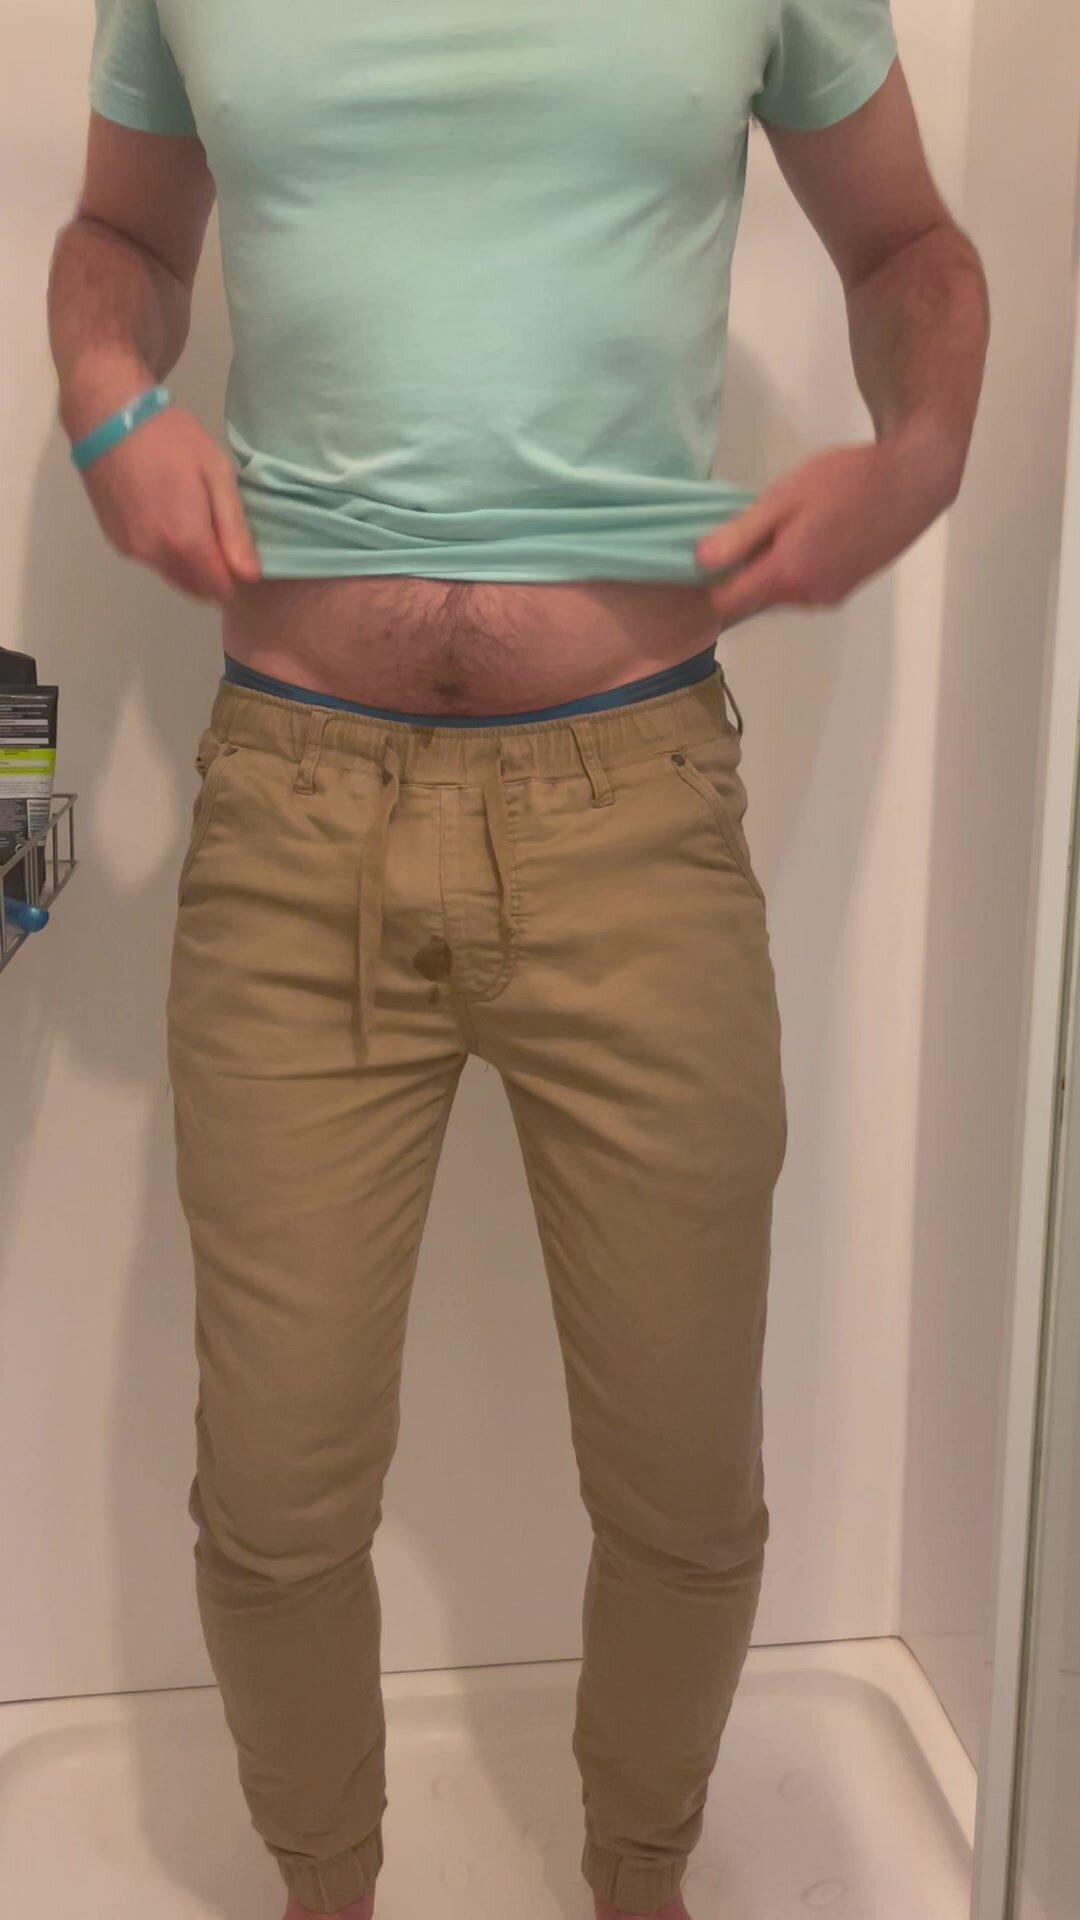 Piss day in mates clothes 1